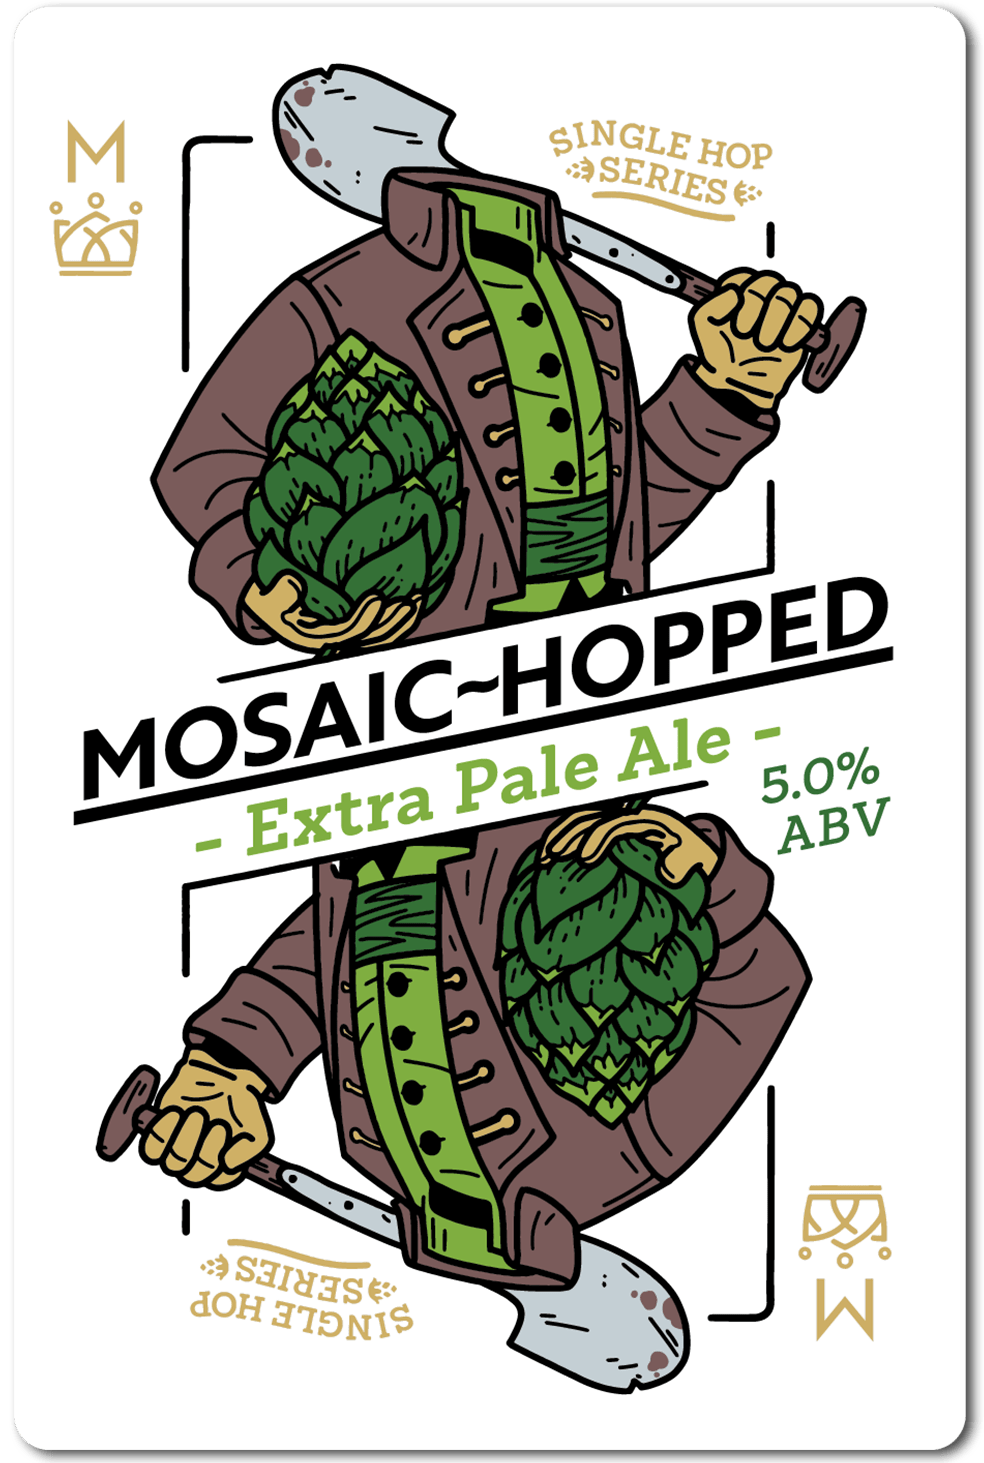 mosaic-hopped-extra-pale-ale.png